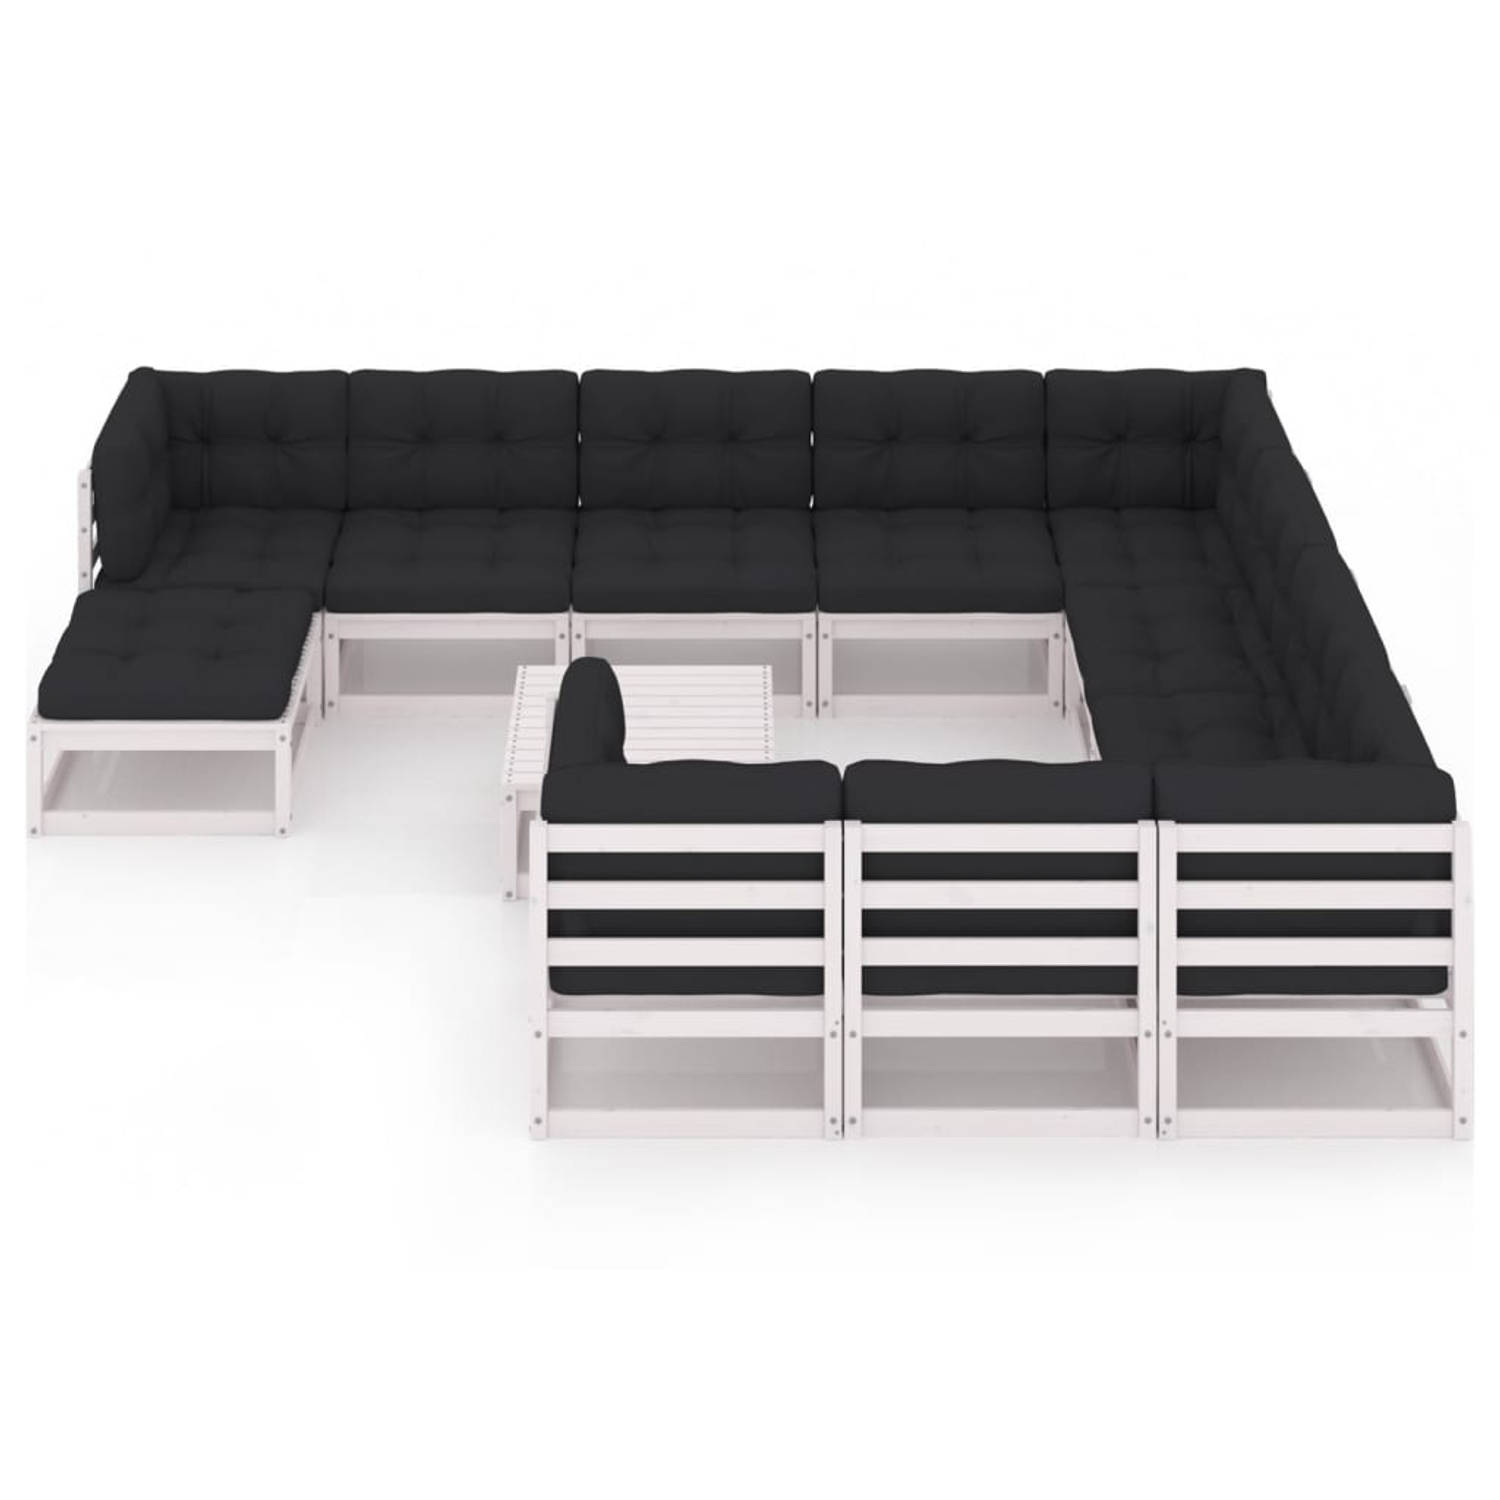 The Living Store 12-delige Loungeset met kussens massief grenenhout wit - Tuinset